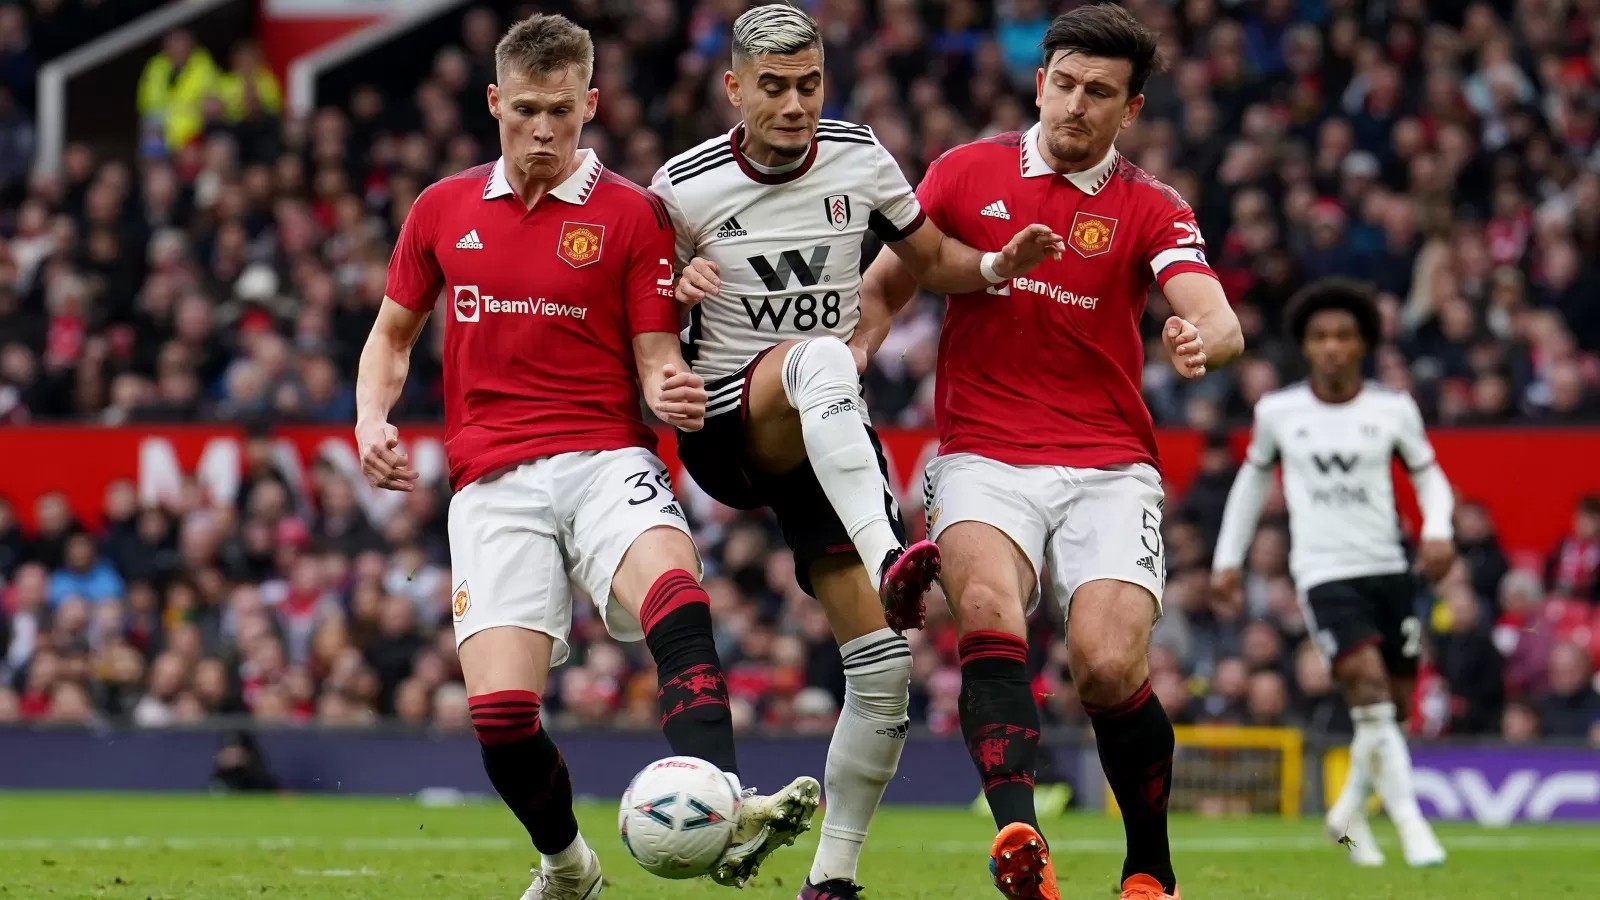 Man Utd midfielder lines up in weekend’s worst XI after failing to seize big chance